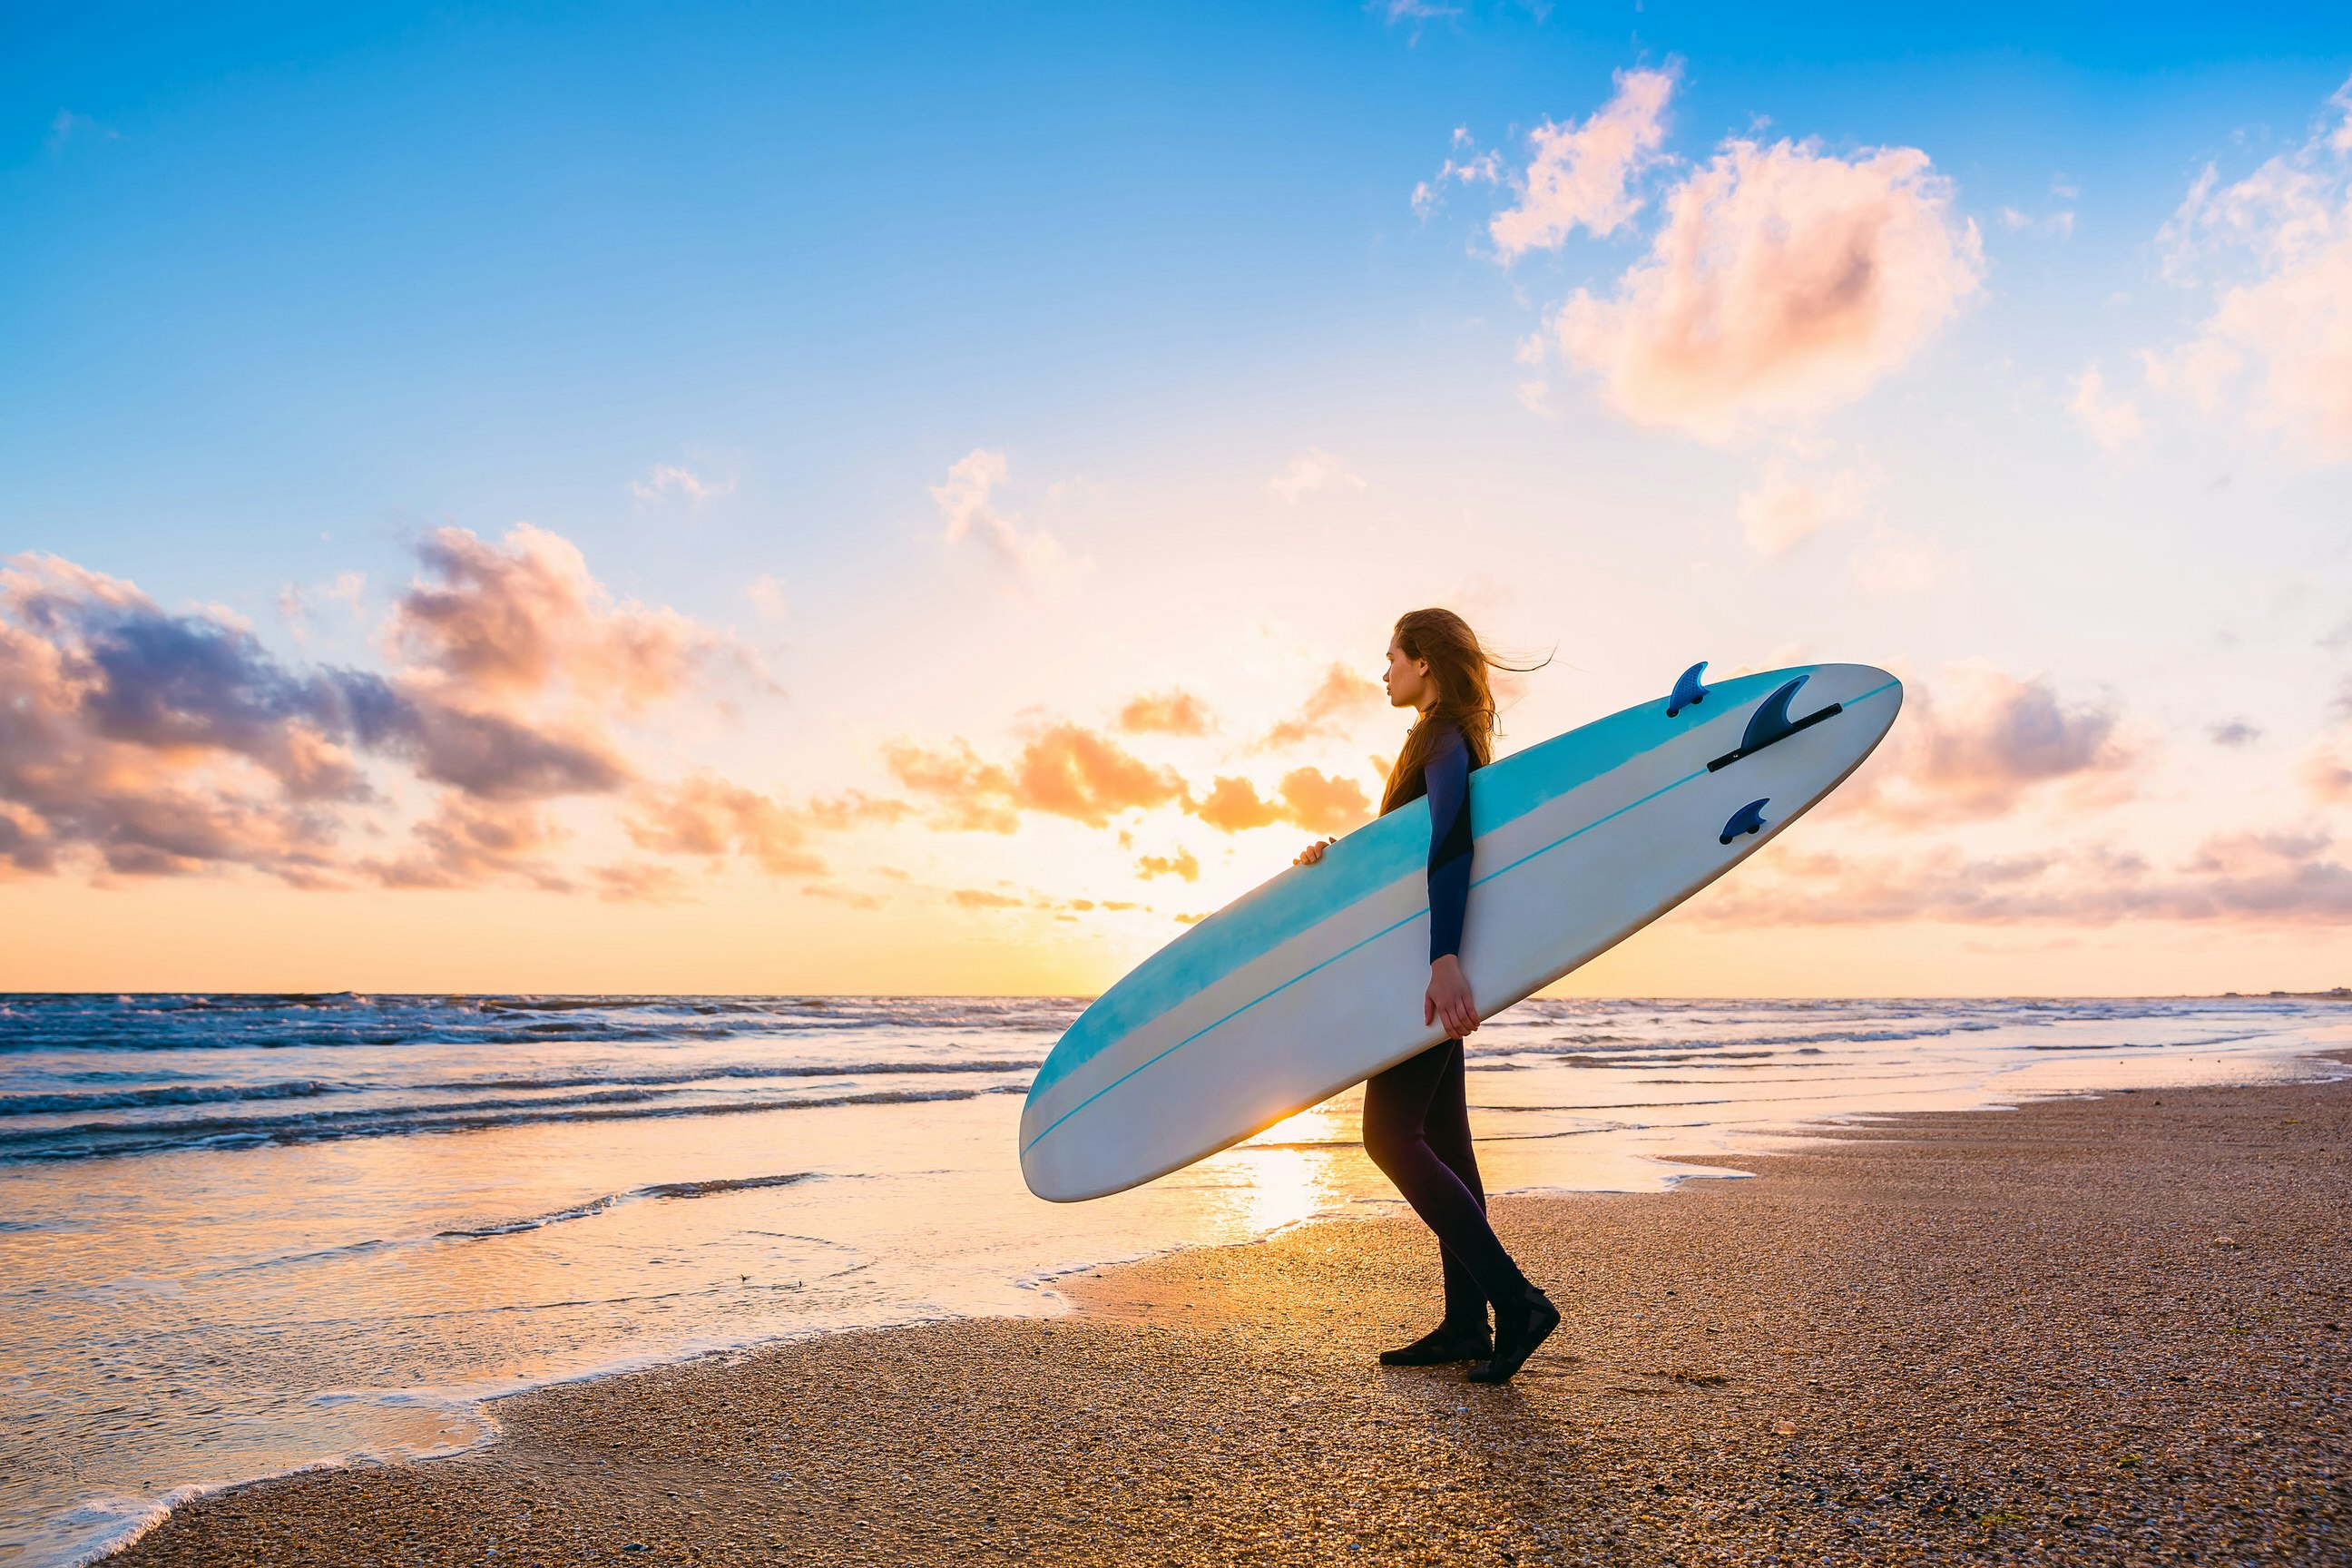 A female surfer standing with a board on the beach at sunset; the sky is cobalt blue at the top of the image, but golden at sea level.